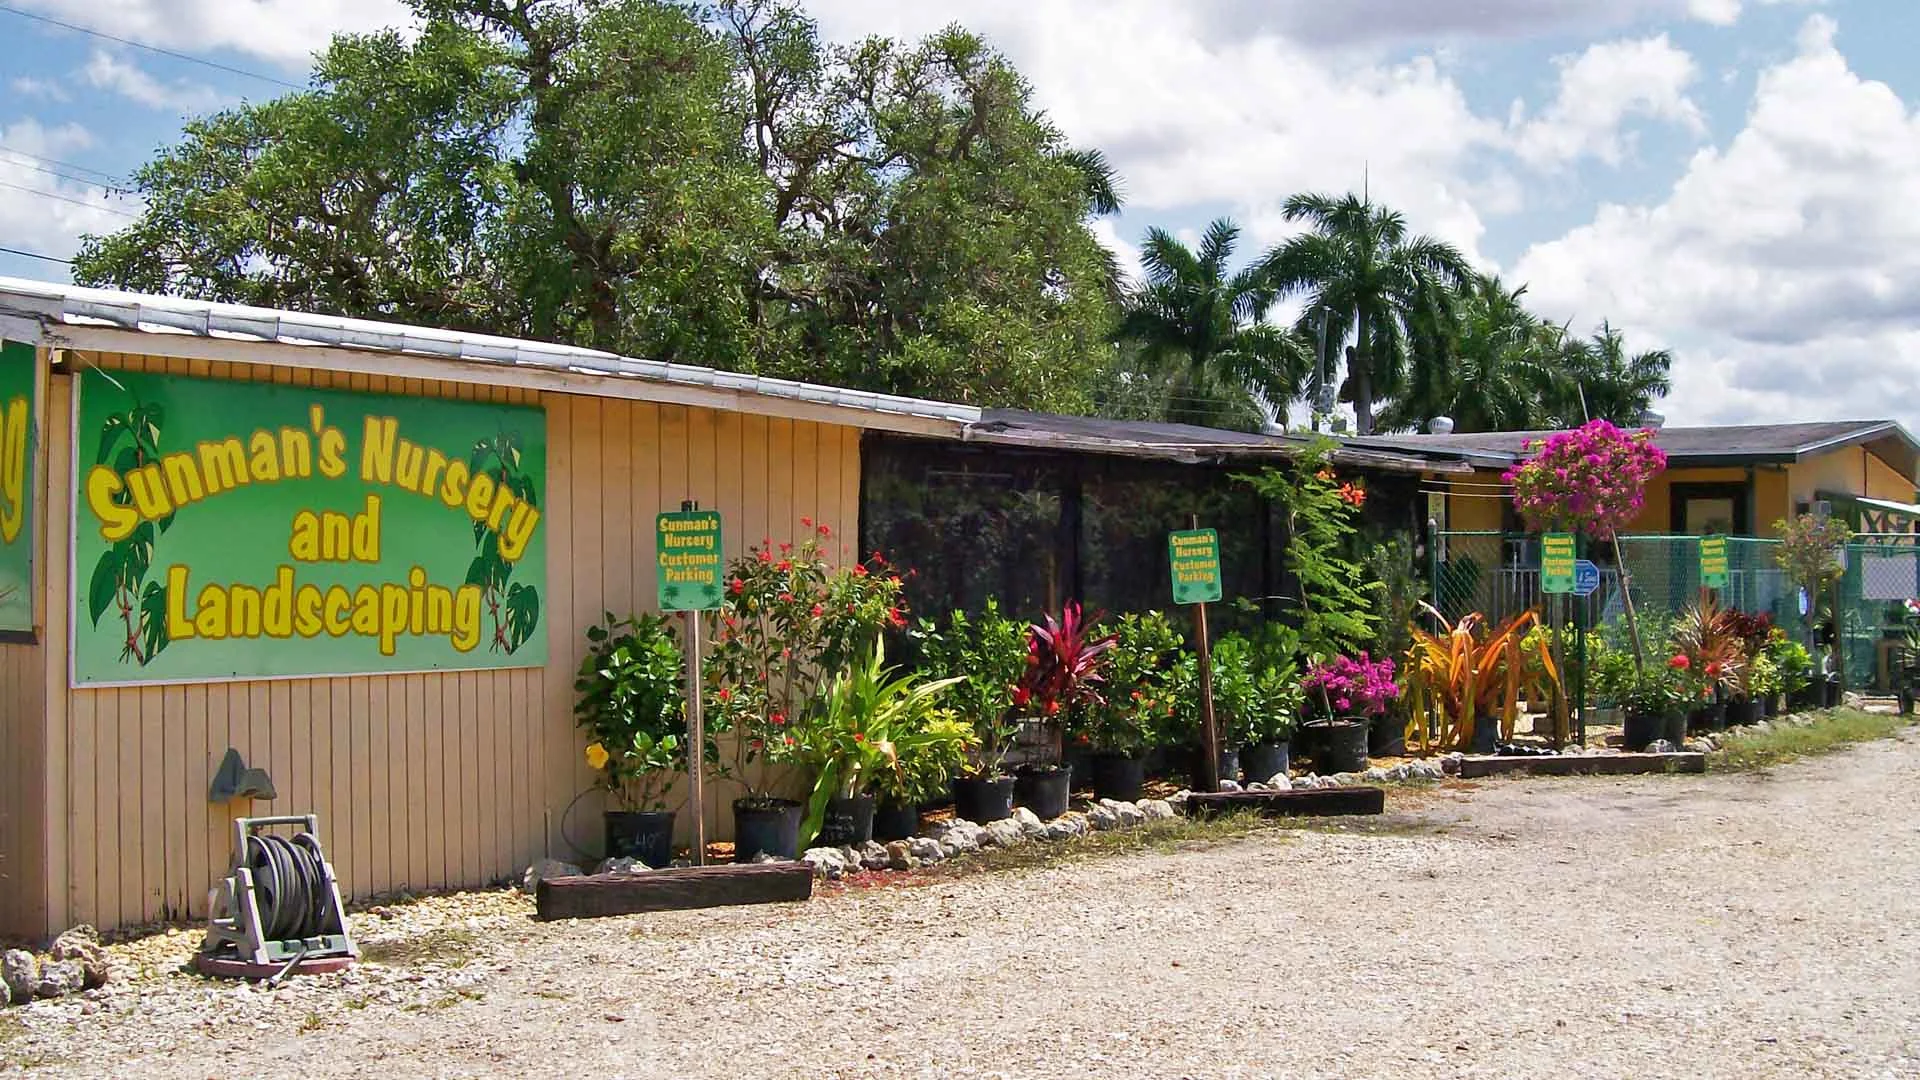 Background photo of Sunman's Nursery in Fort Myers, FL.